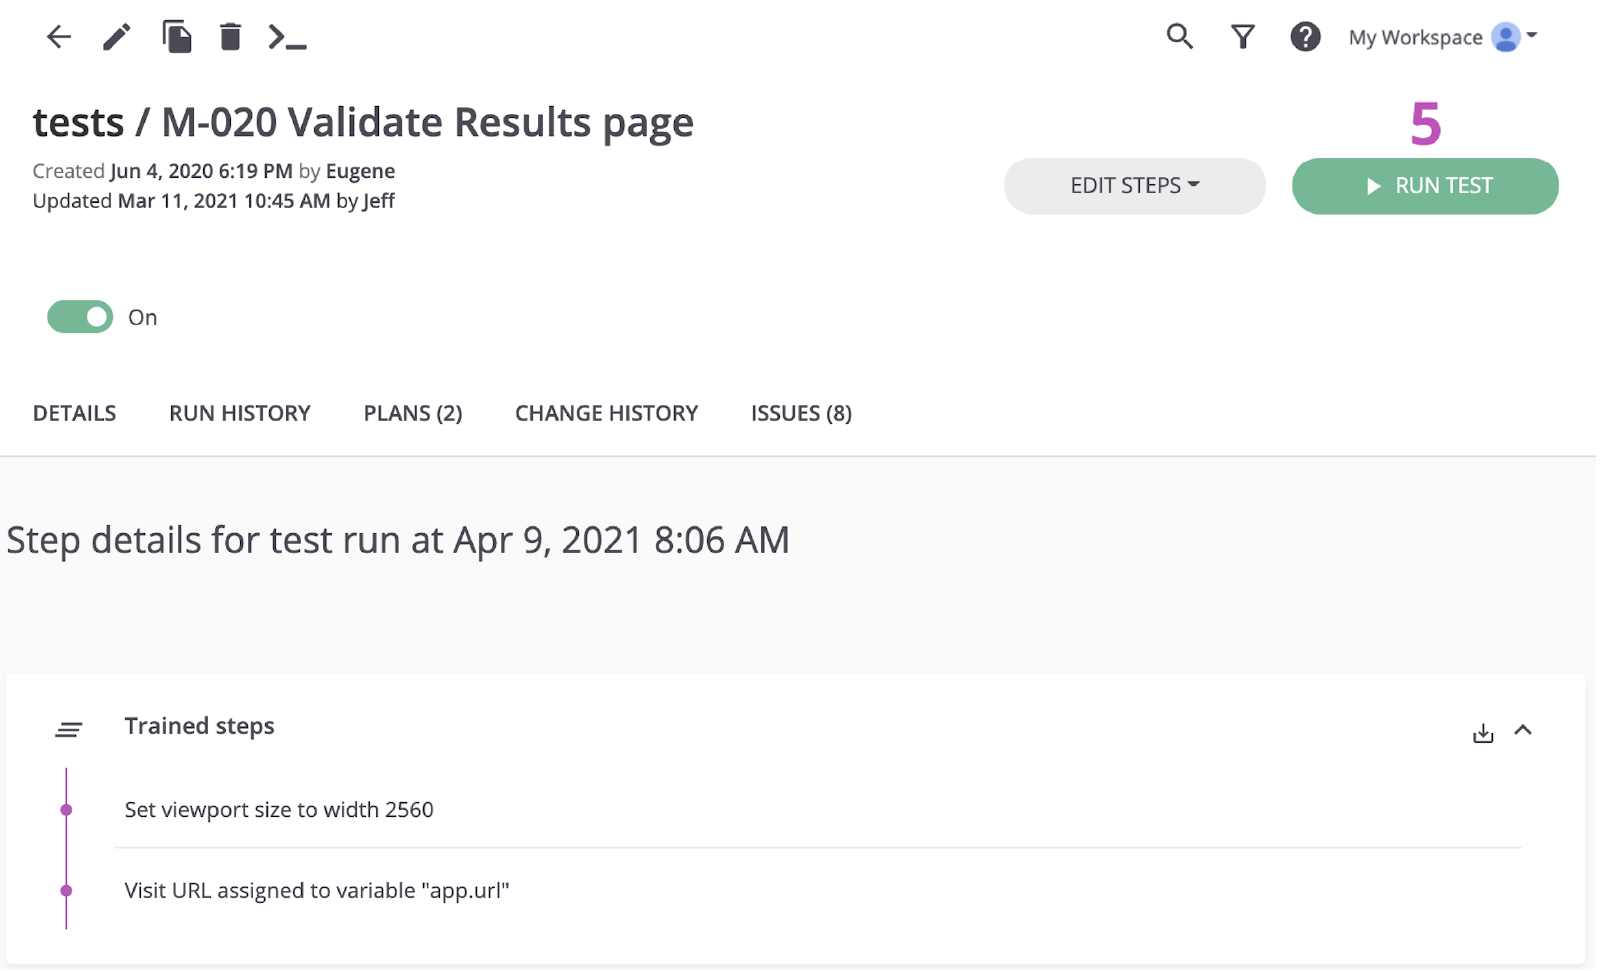 Tests / M-020 Validate Results page